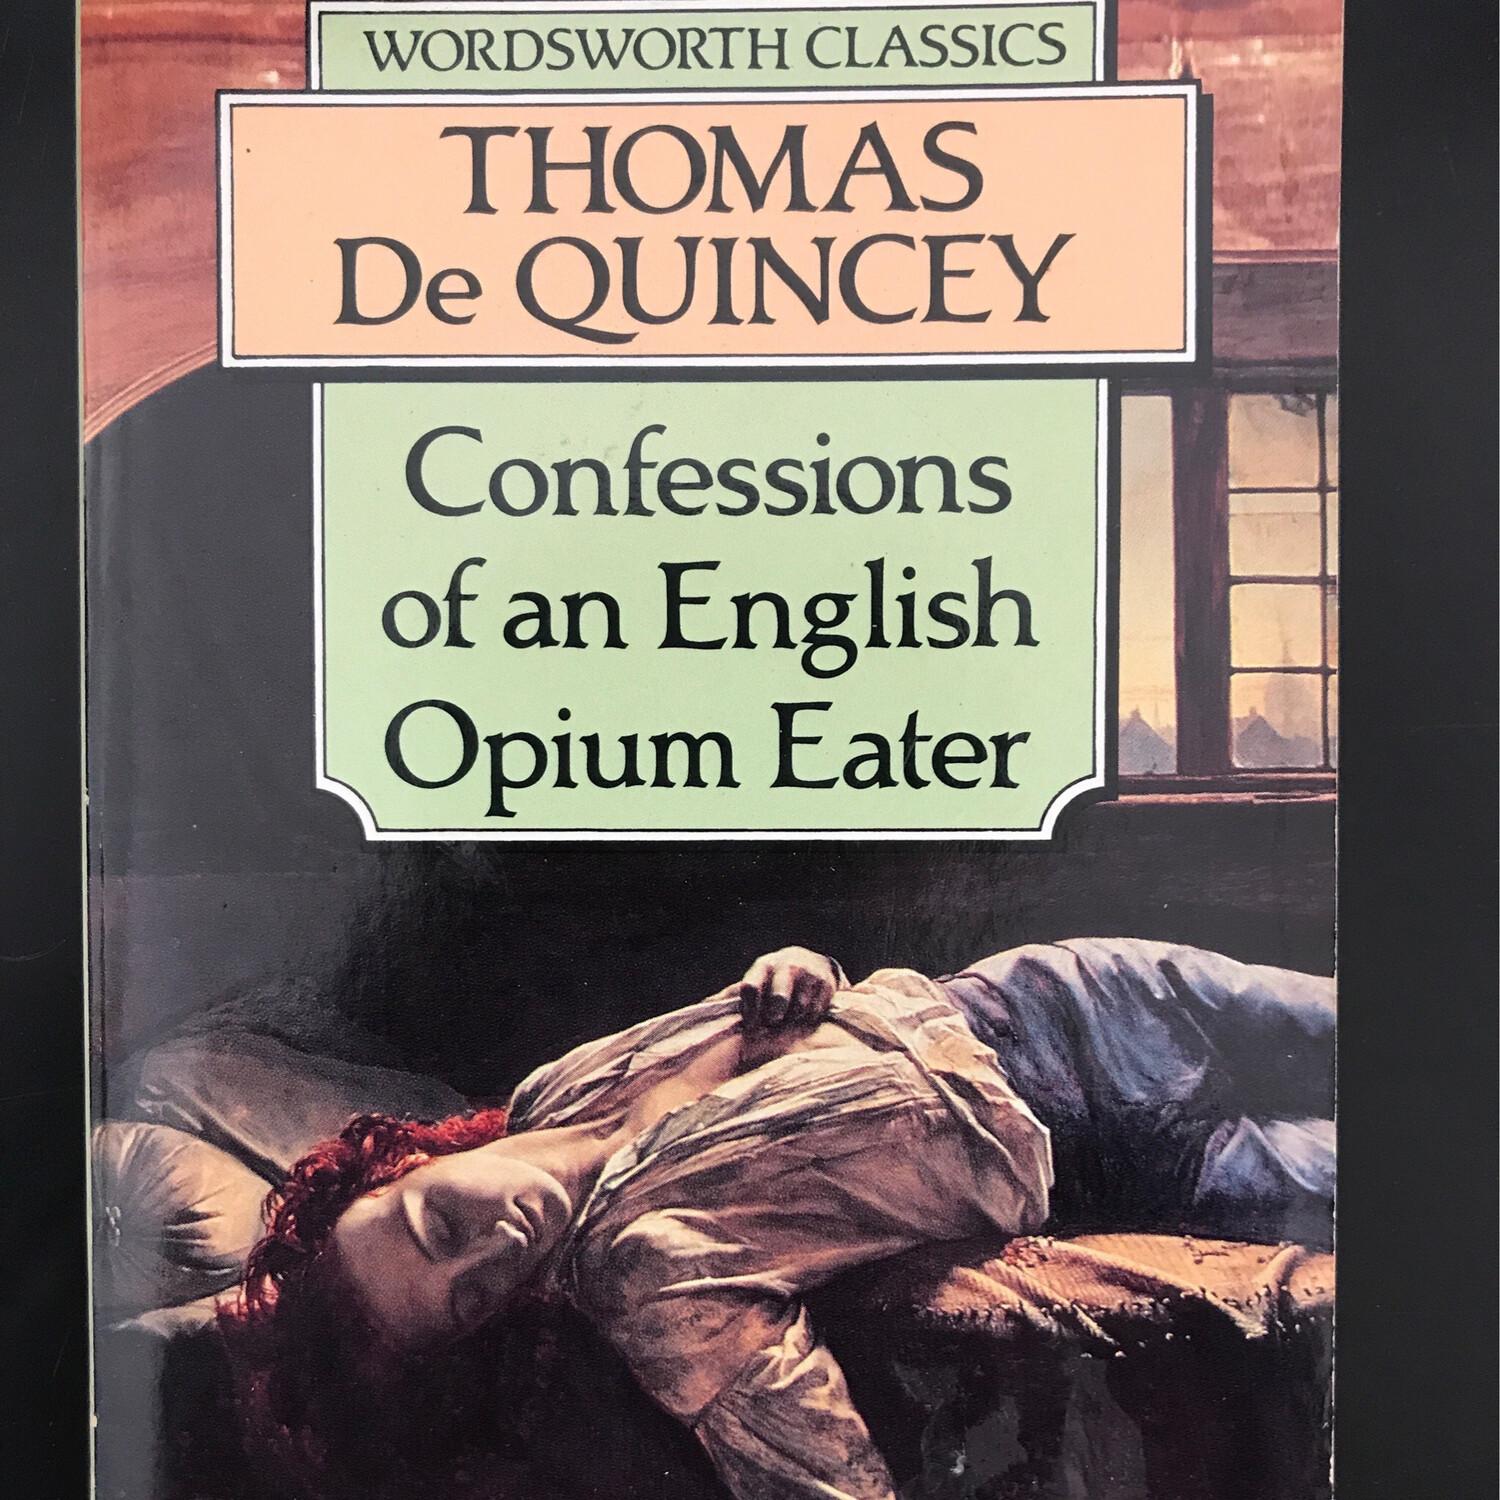 Confessions Of An English Opium Eater, Thomas De Quincey